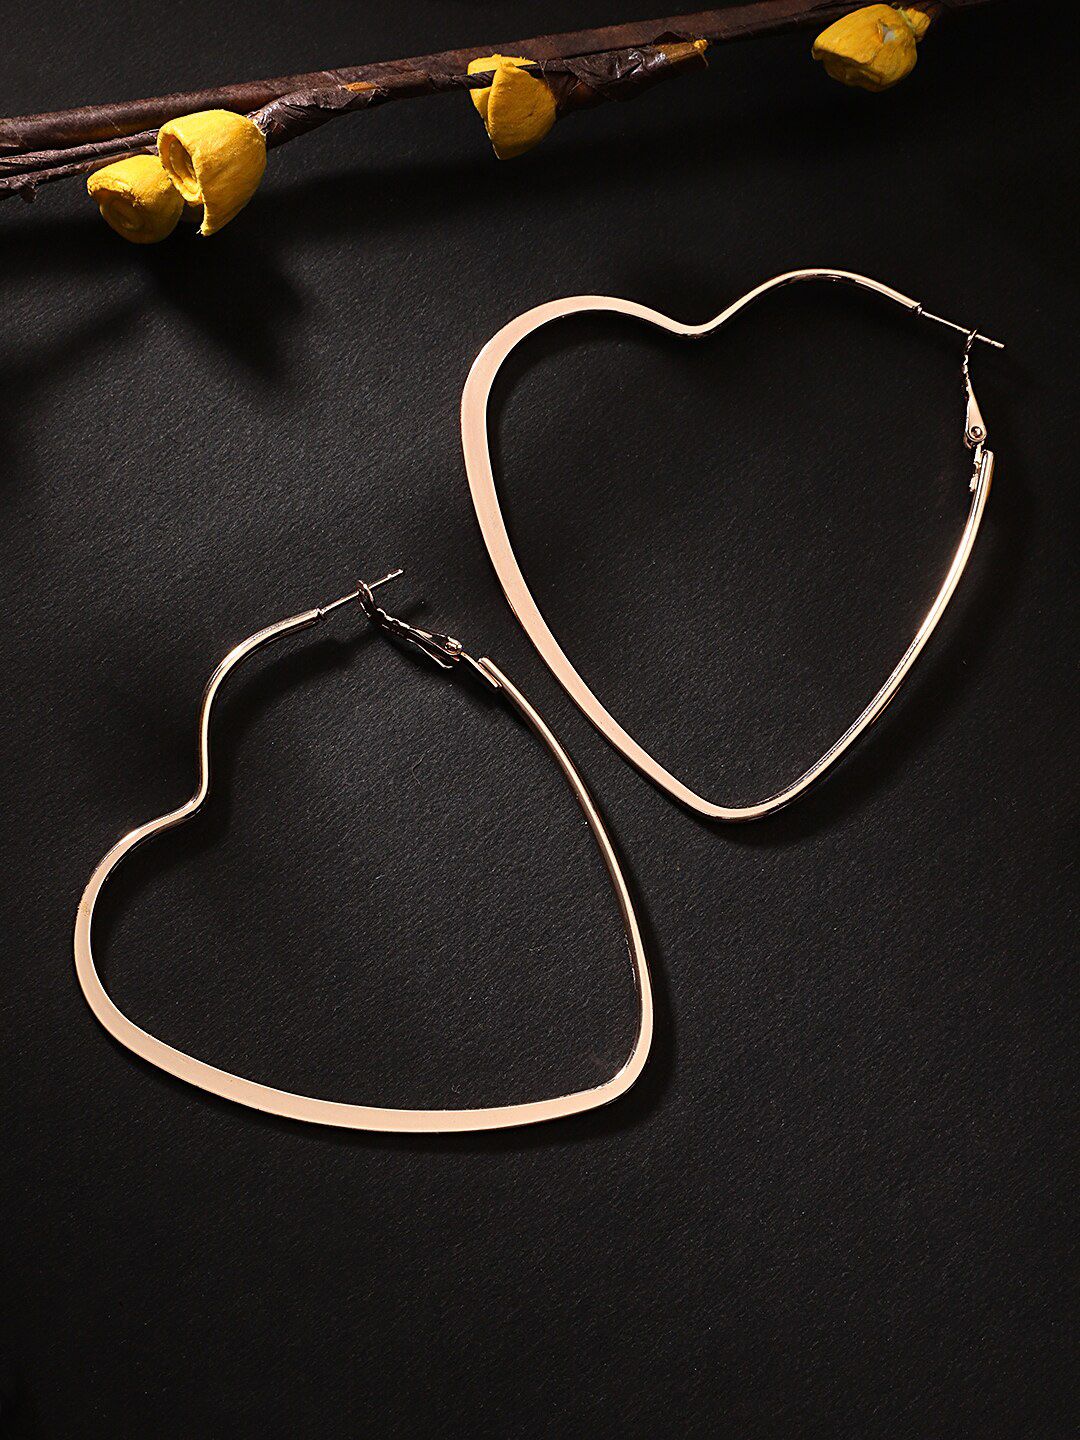 KACY Gold-Plated Heart Shaped Hoop Earrings Price in India